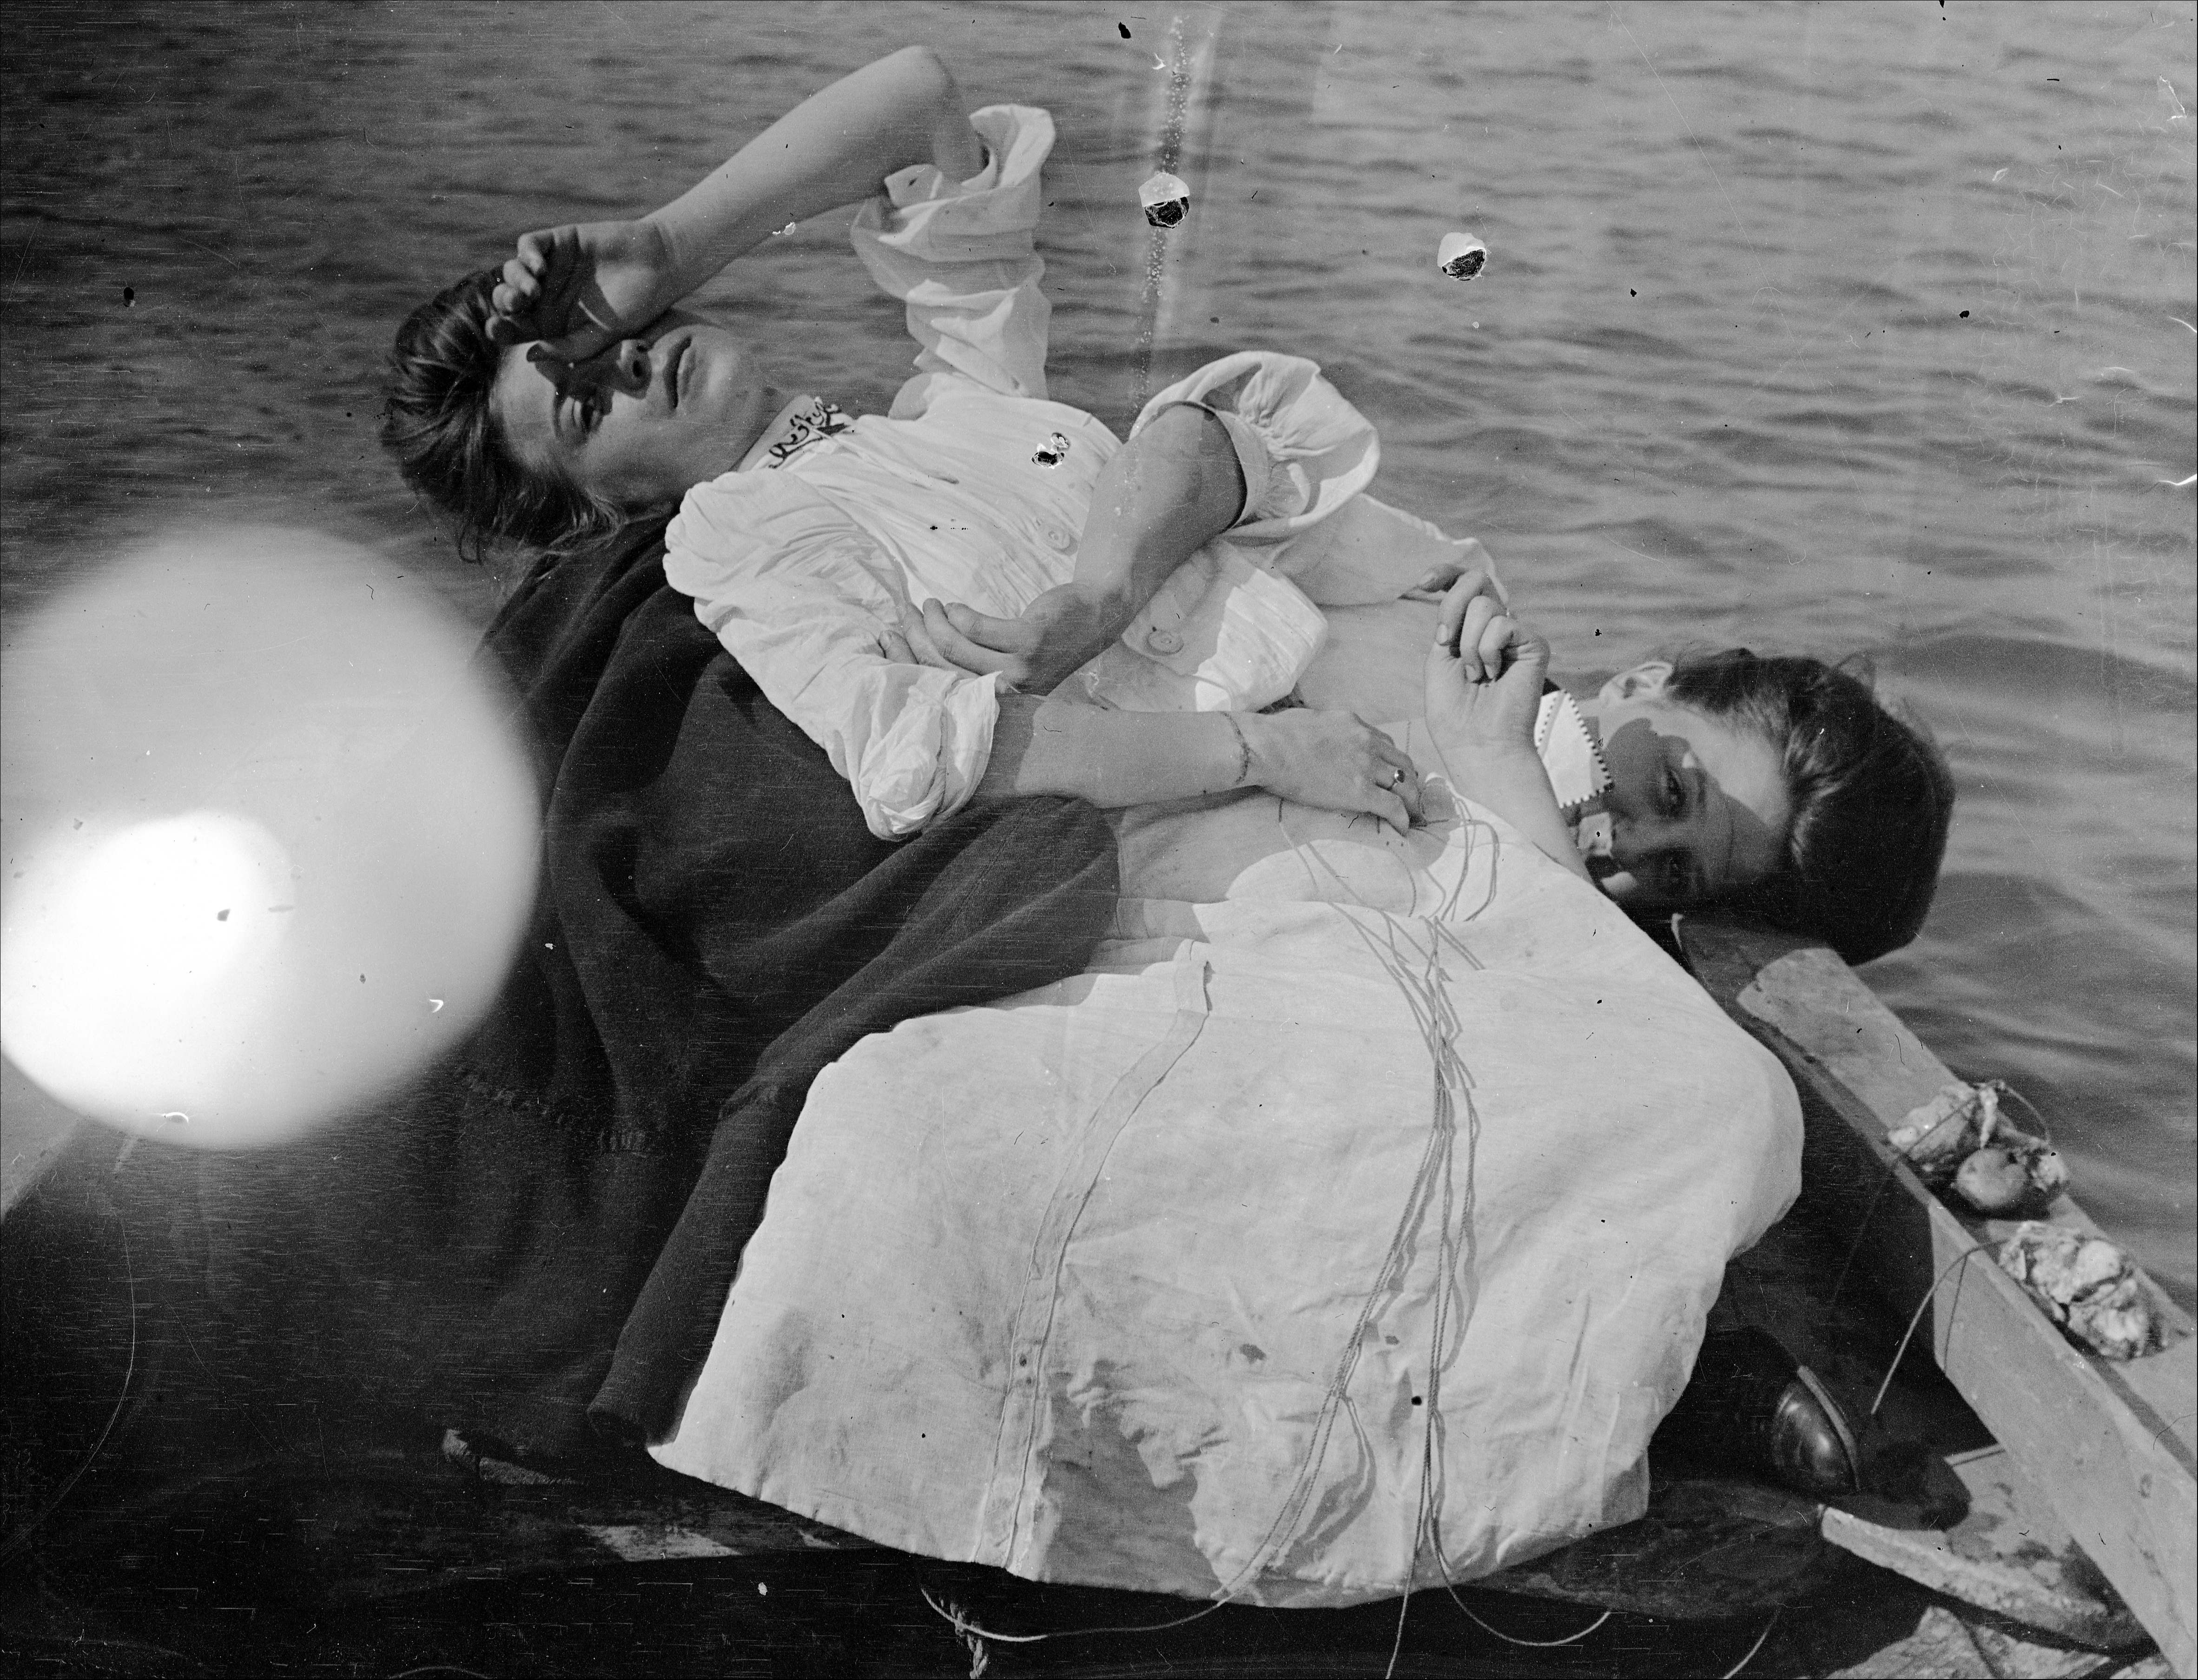 Glass negative image of two women in a rowboat, draped dramatically on top of one another.